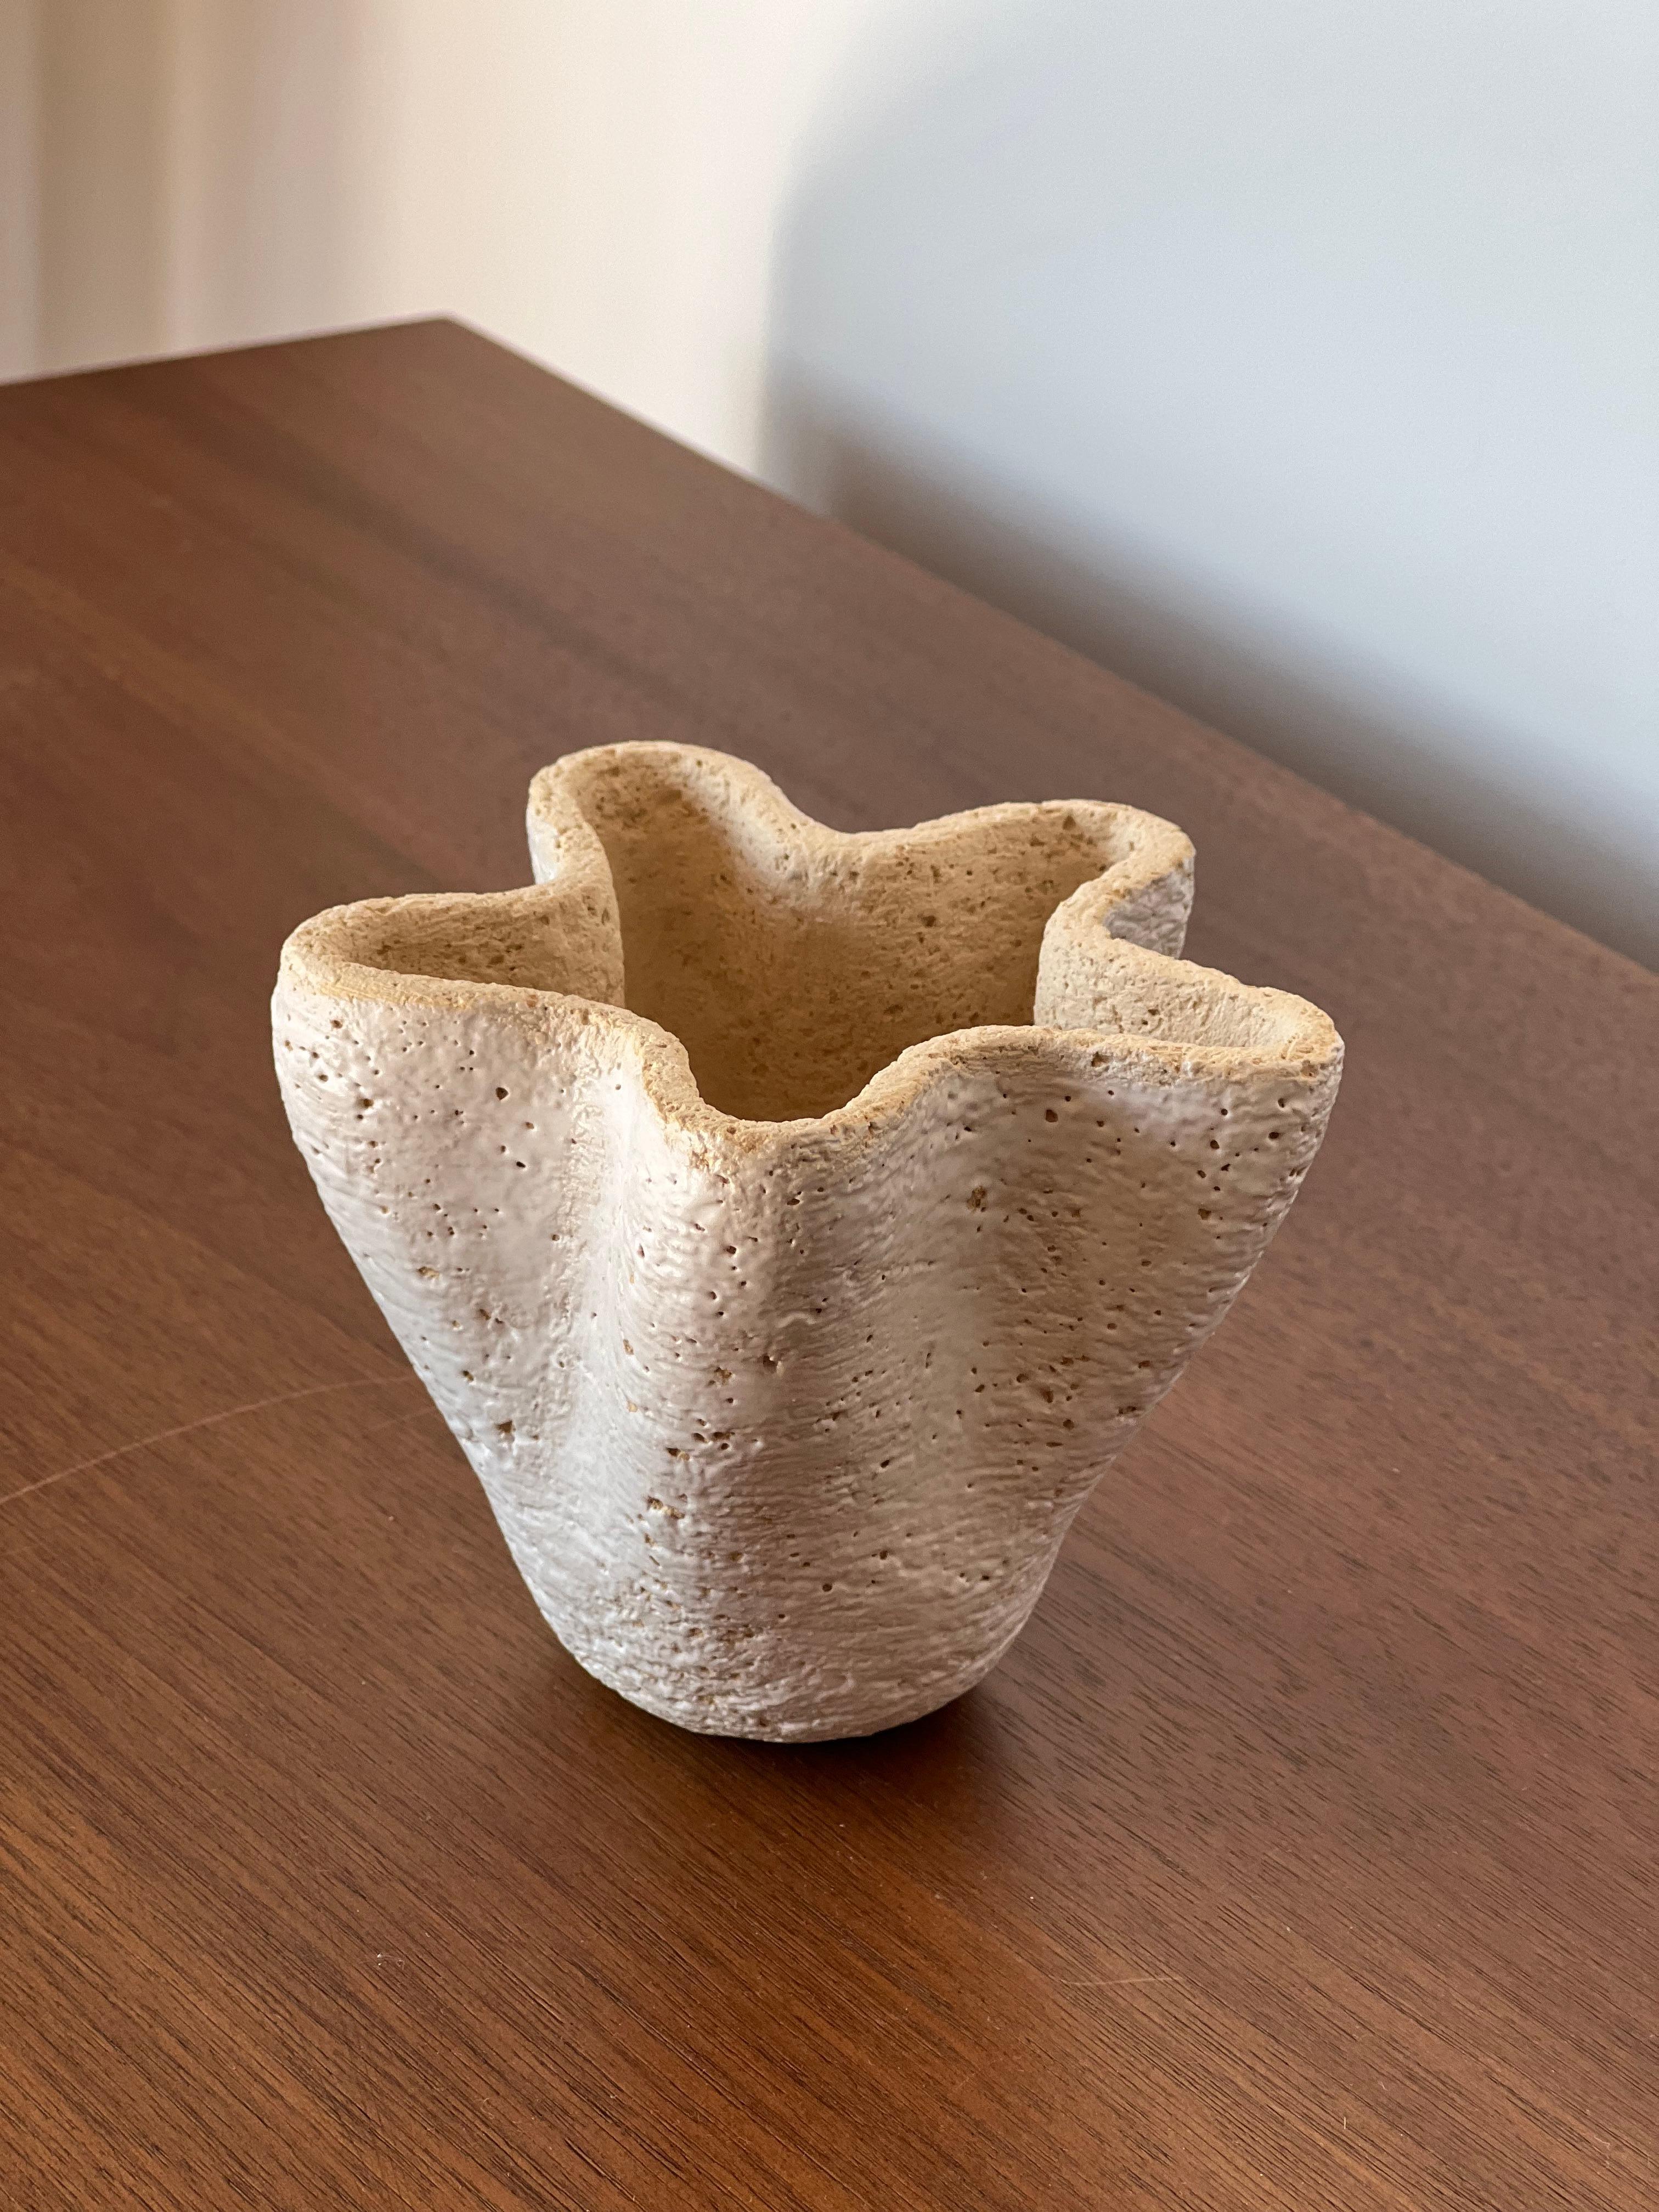 Anatolian 6 Vase by Güler Elçi
Dimensions: W 11.4 x D 11.4 x H 12.7 cm.
Materials: Stoneware Ceramic.

Güler Elçi is a ceramic artist based in Istanbul. In the light of her engineering career, she considers ceramics as a material and likes to push